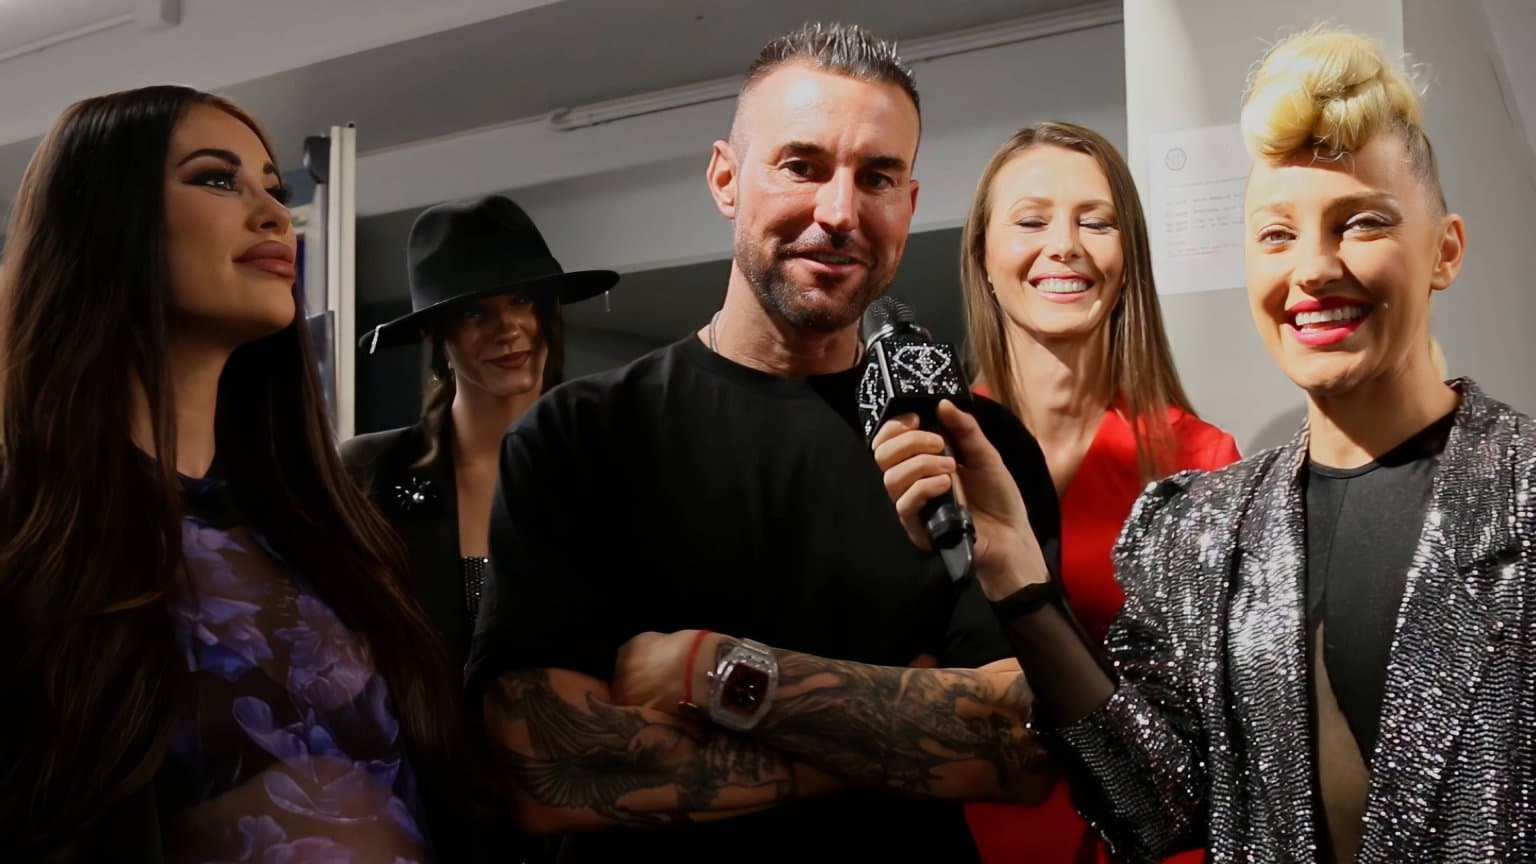 Philipp Plein in an Exclusive Interview for FashionTV